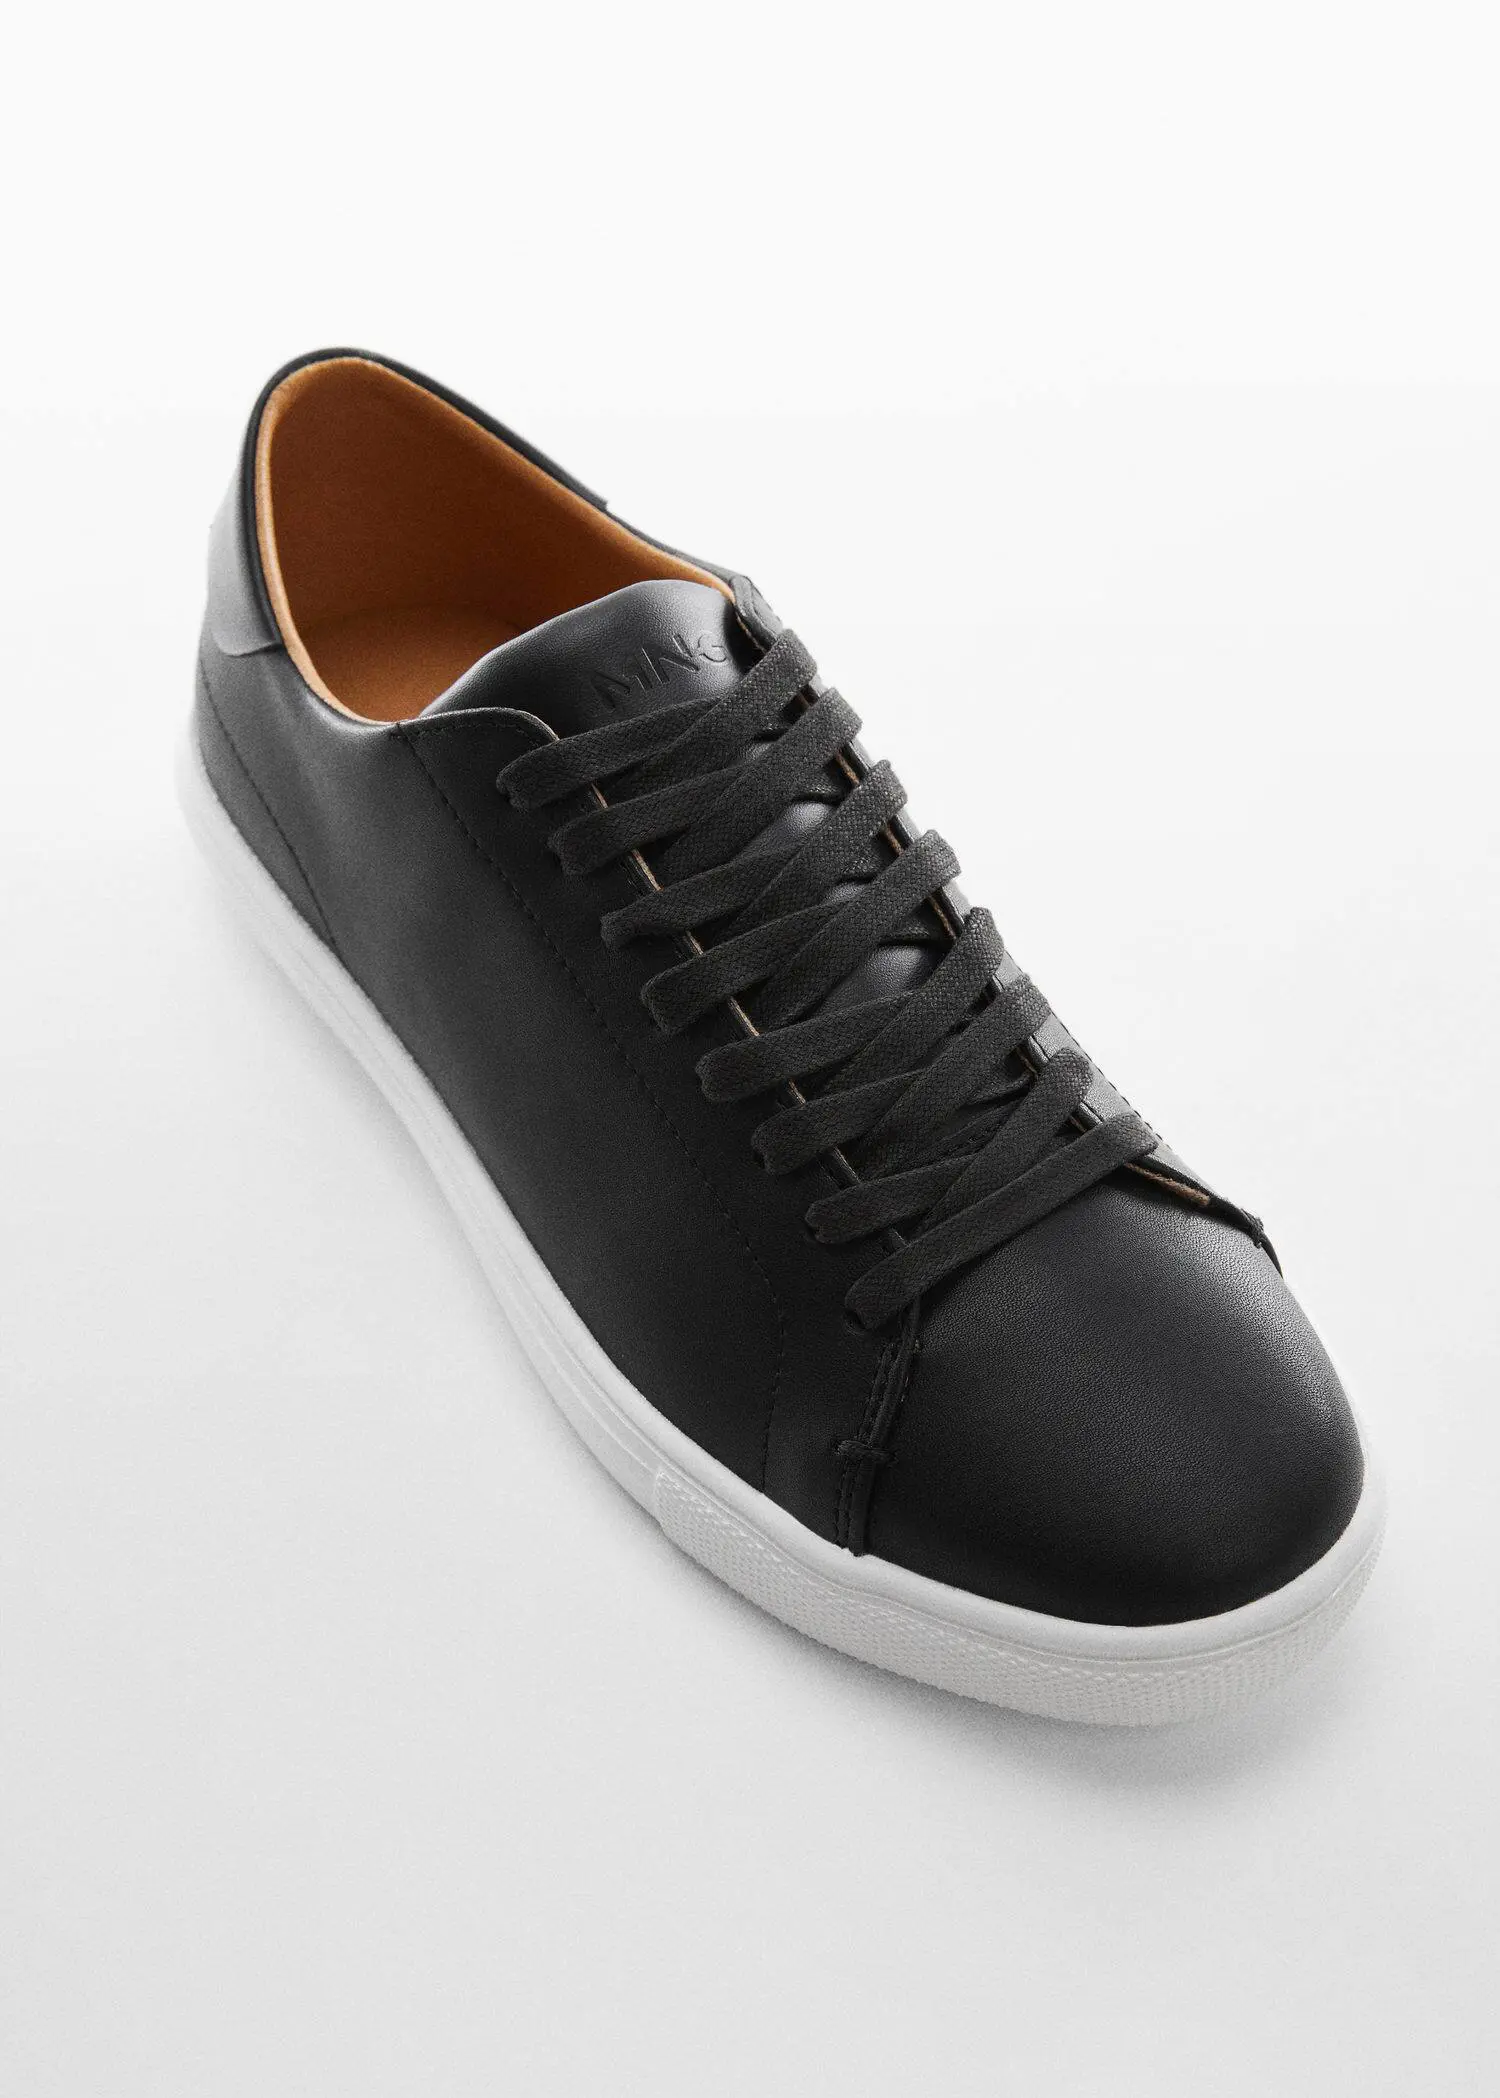 Mango Monocoloured leather sneakers. a pair of black shoes on a white surface. 